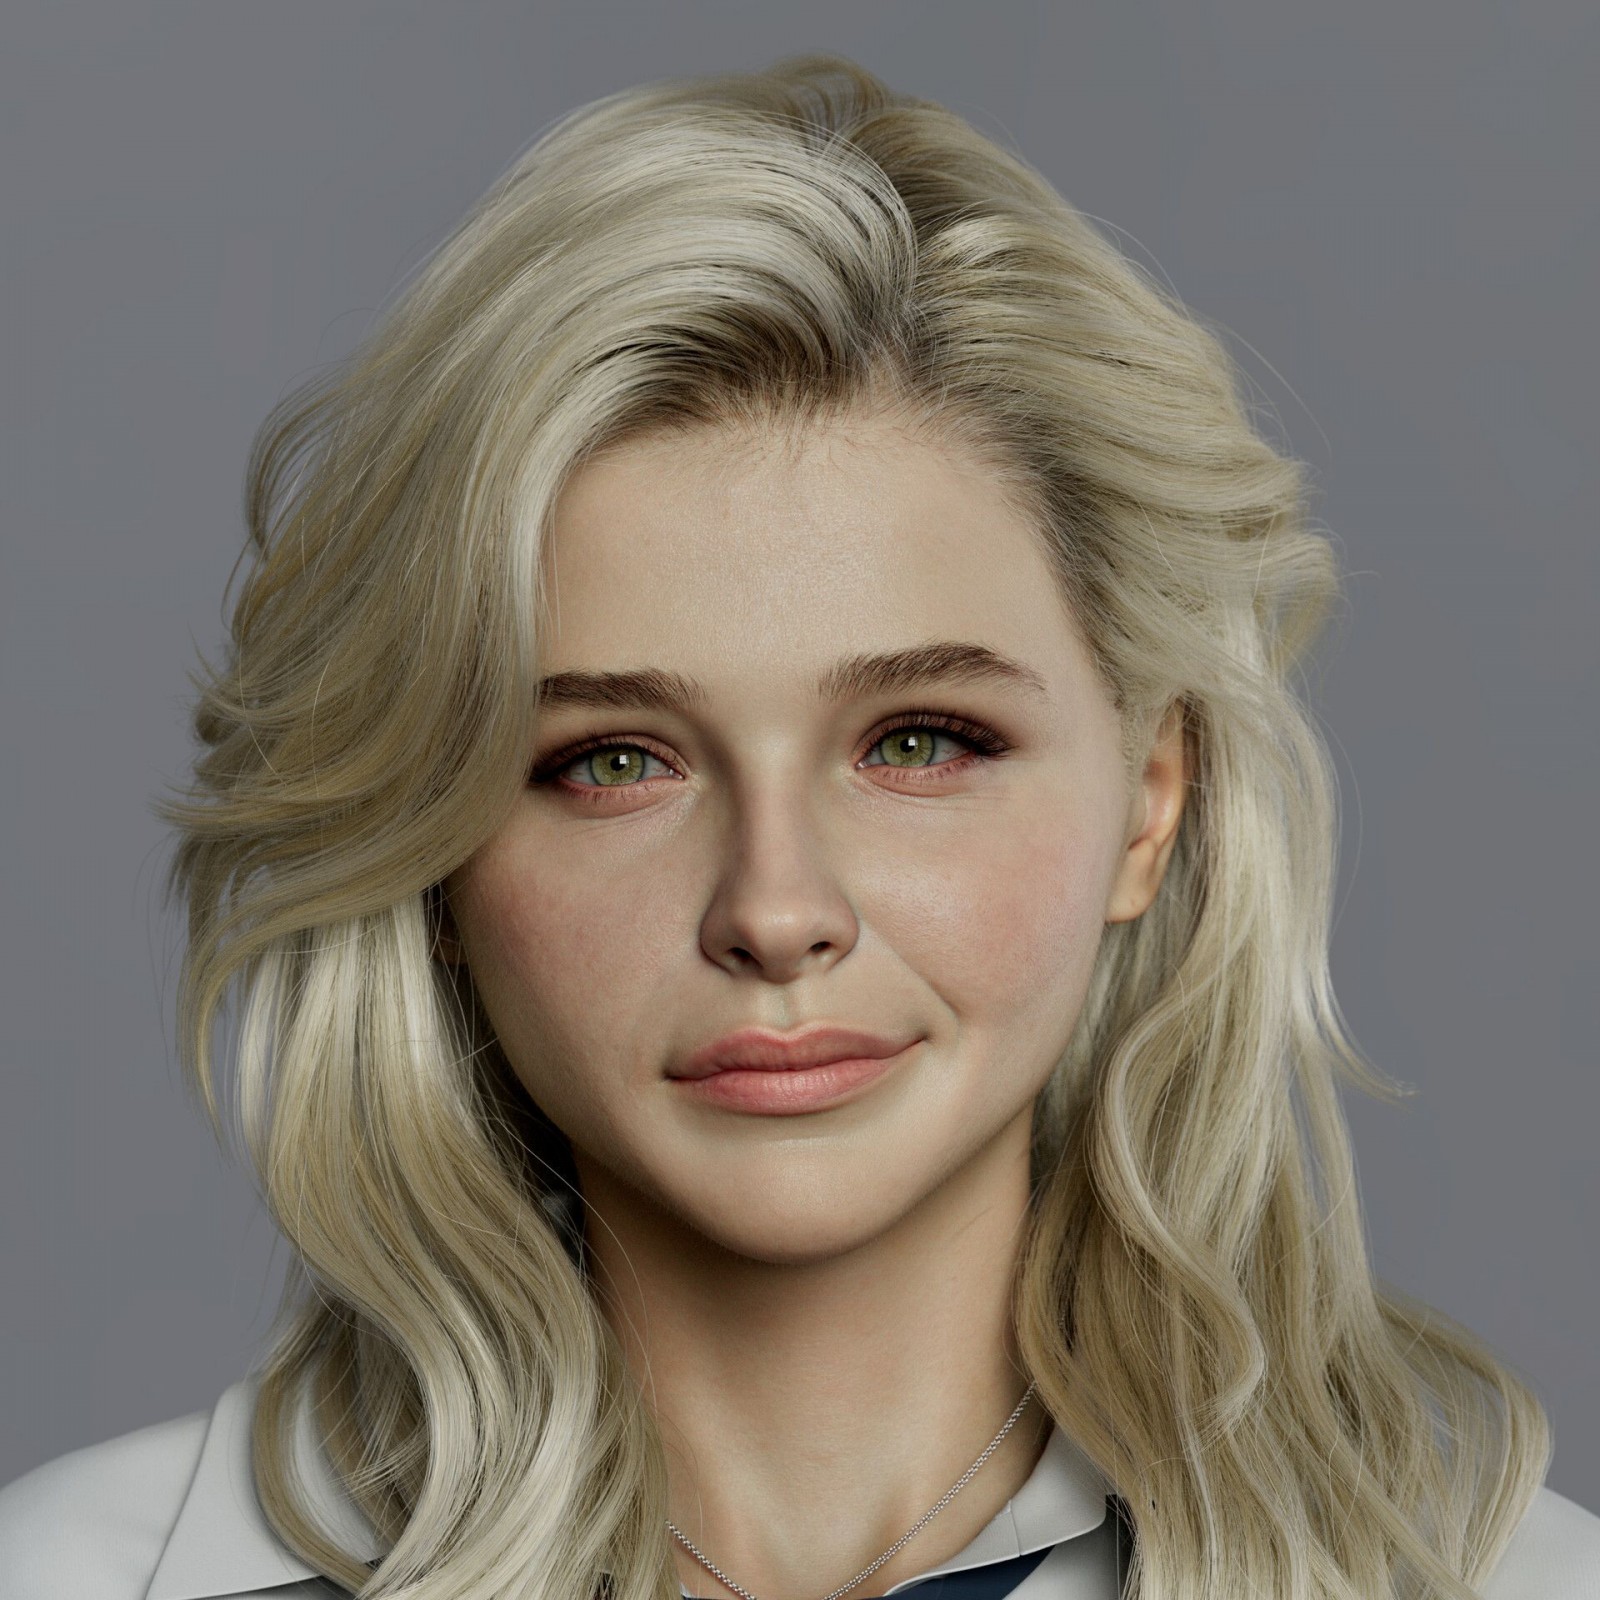 realistic 3d character design chloe grace mortez by aobo